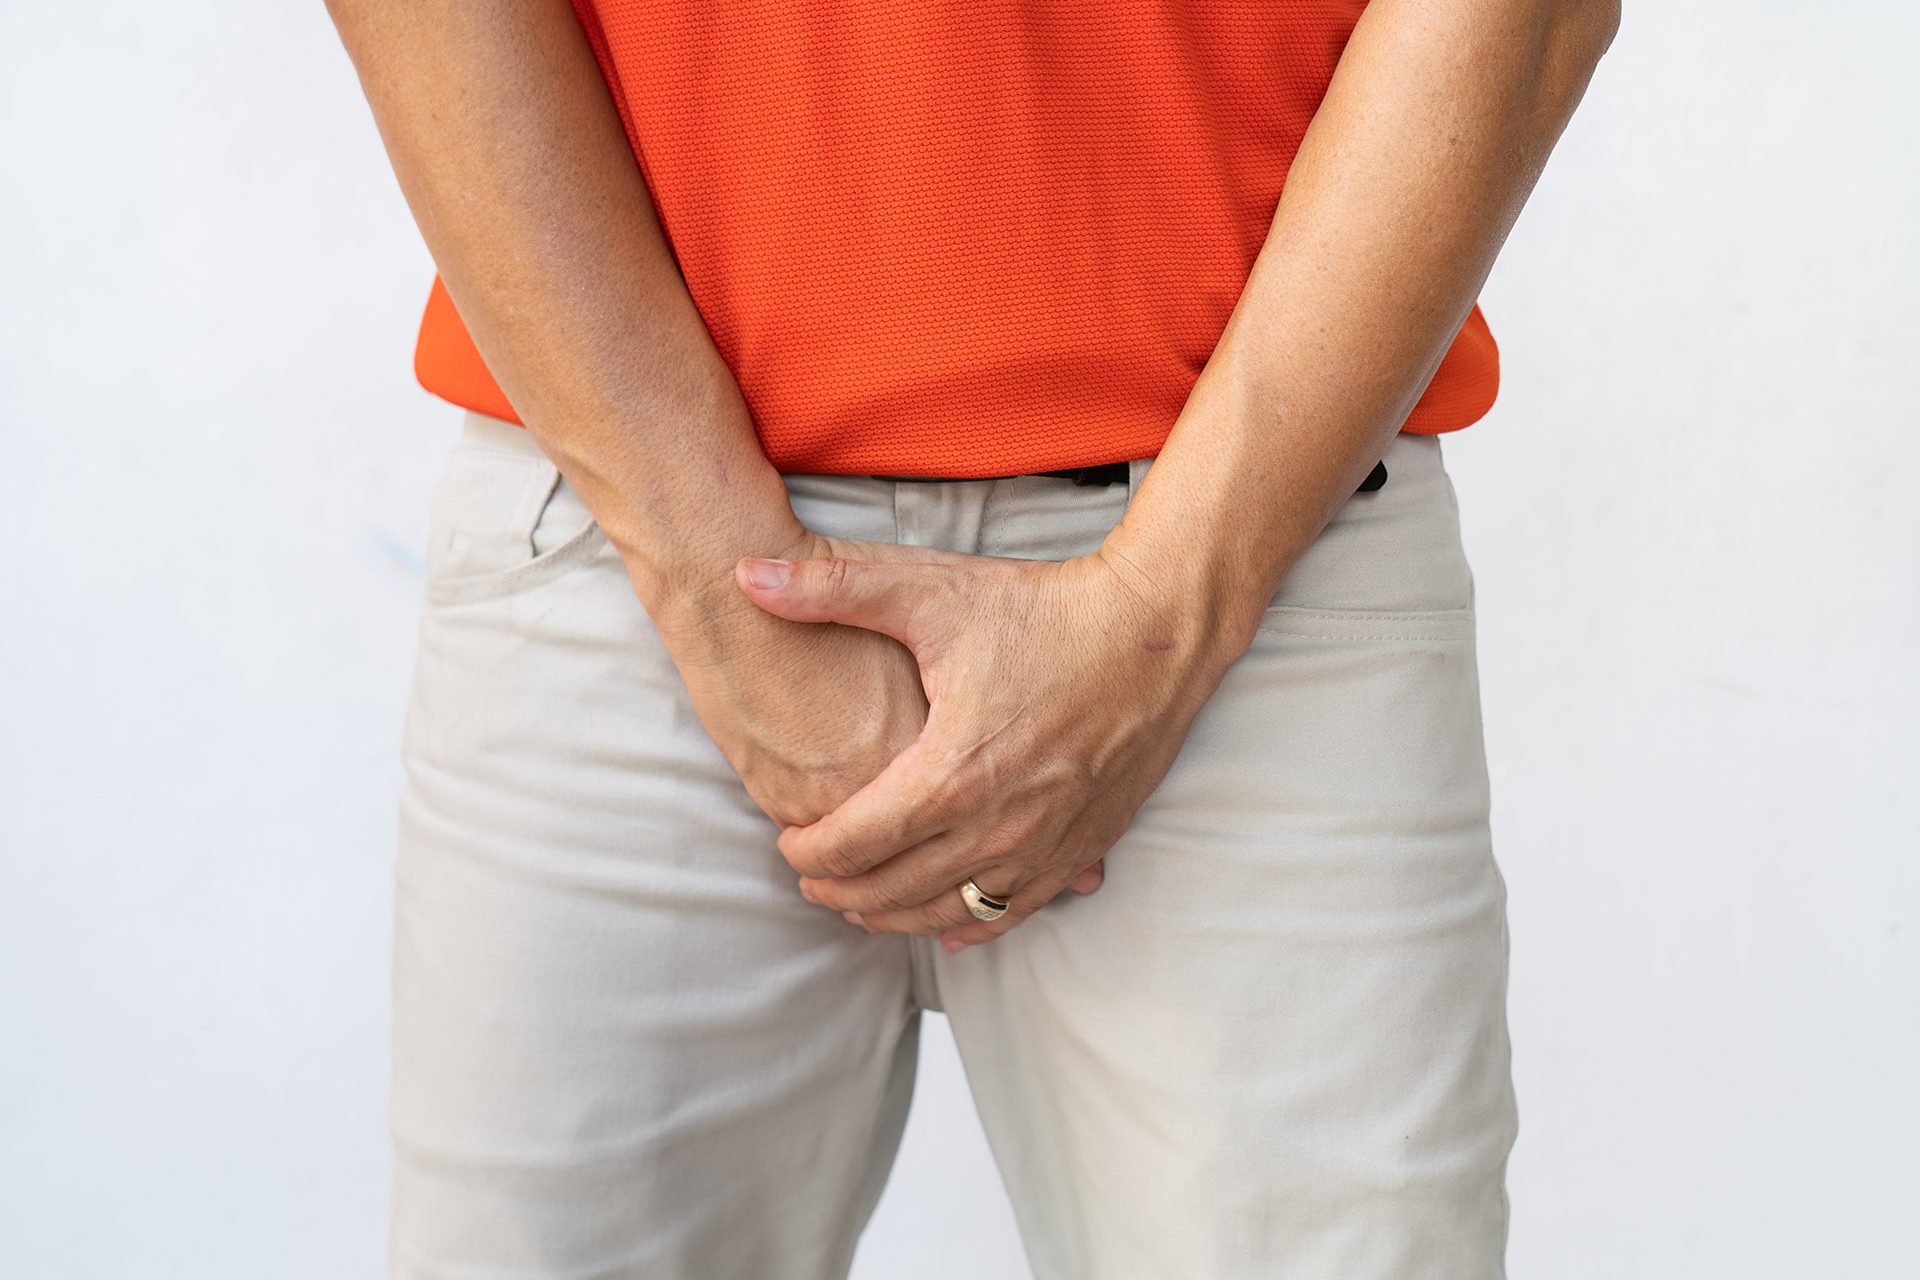 Lower urinary tract symptoms